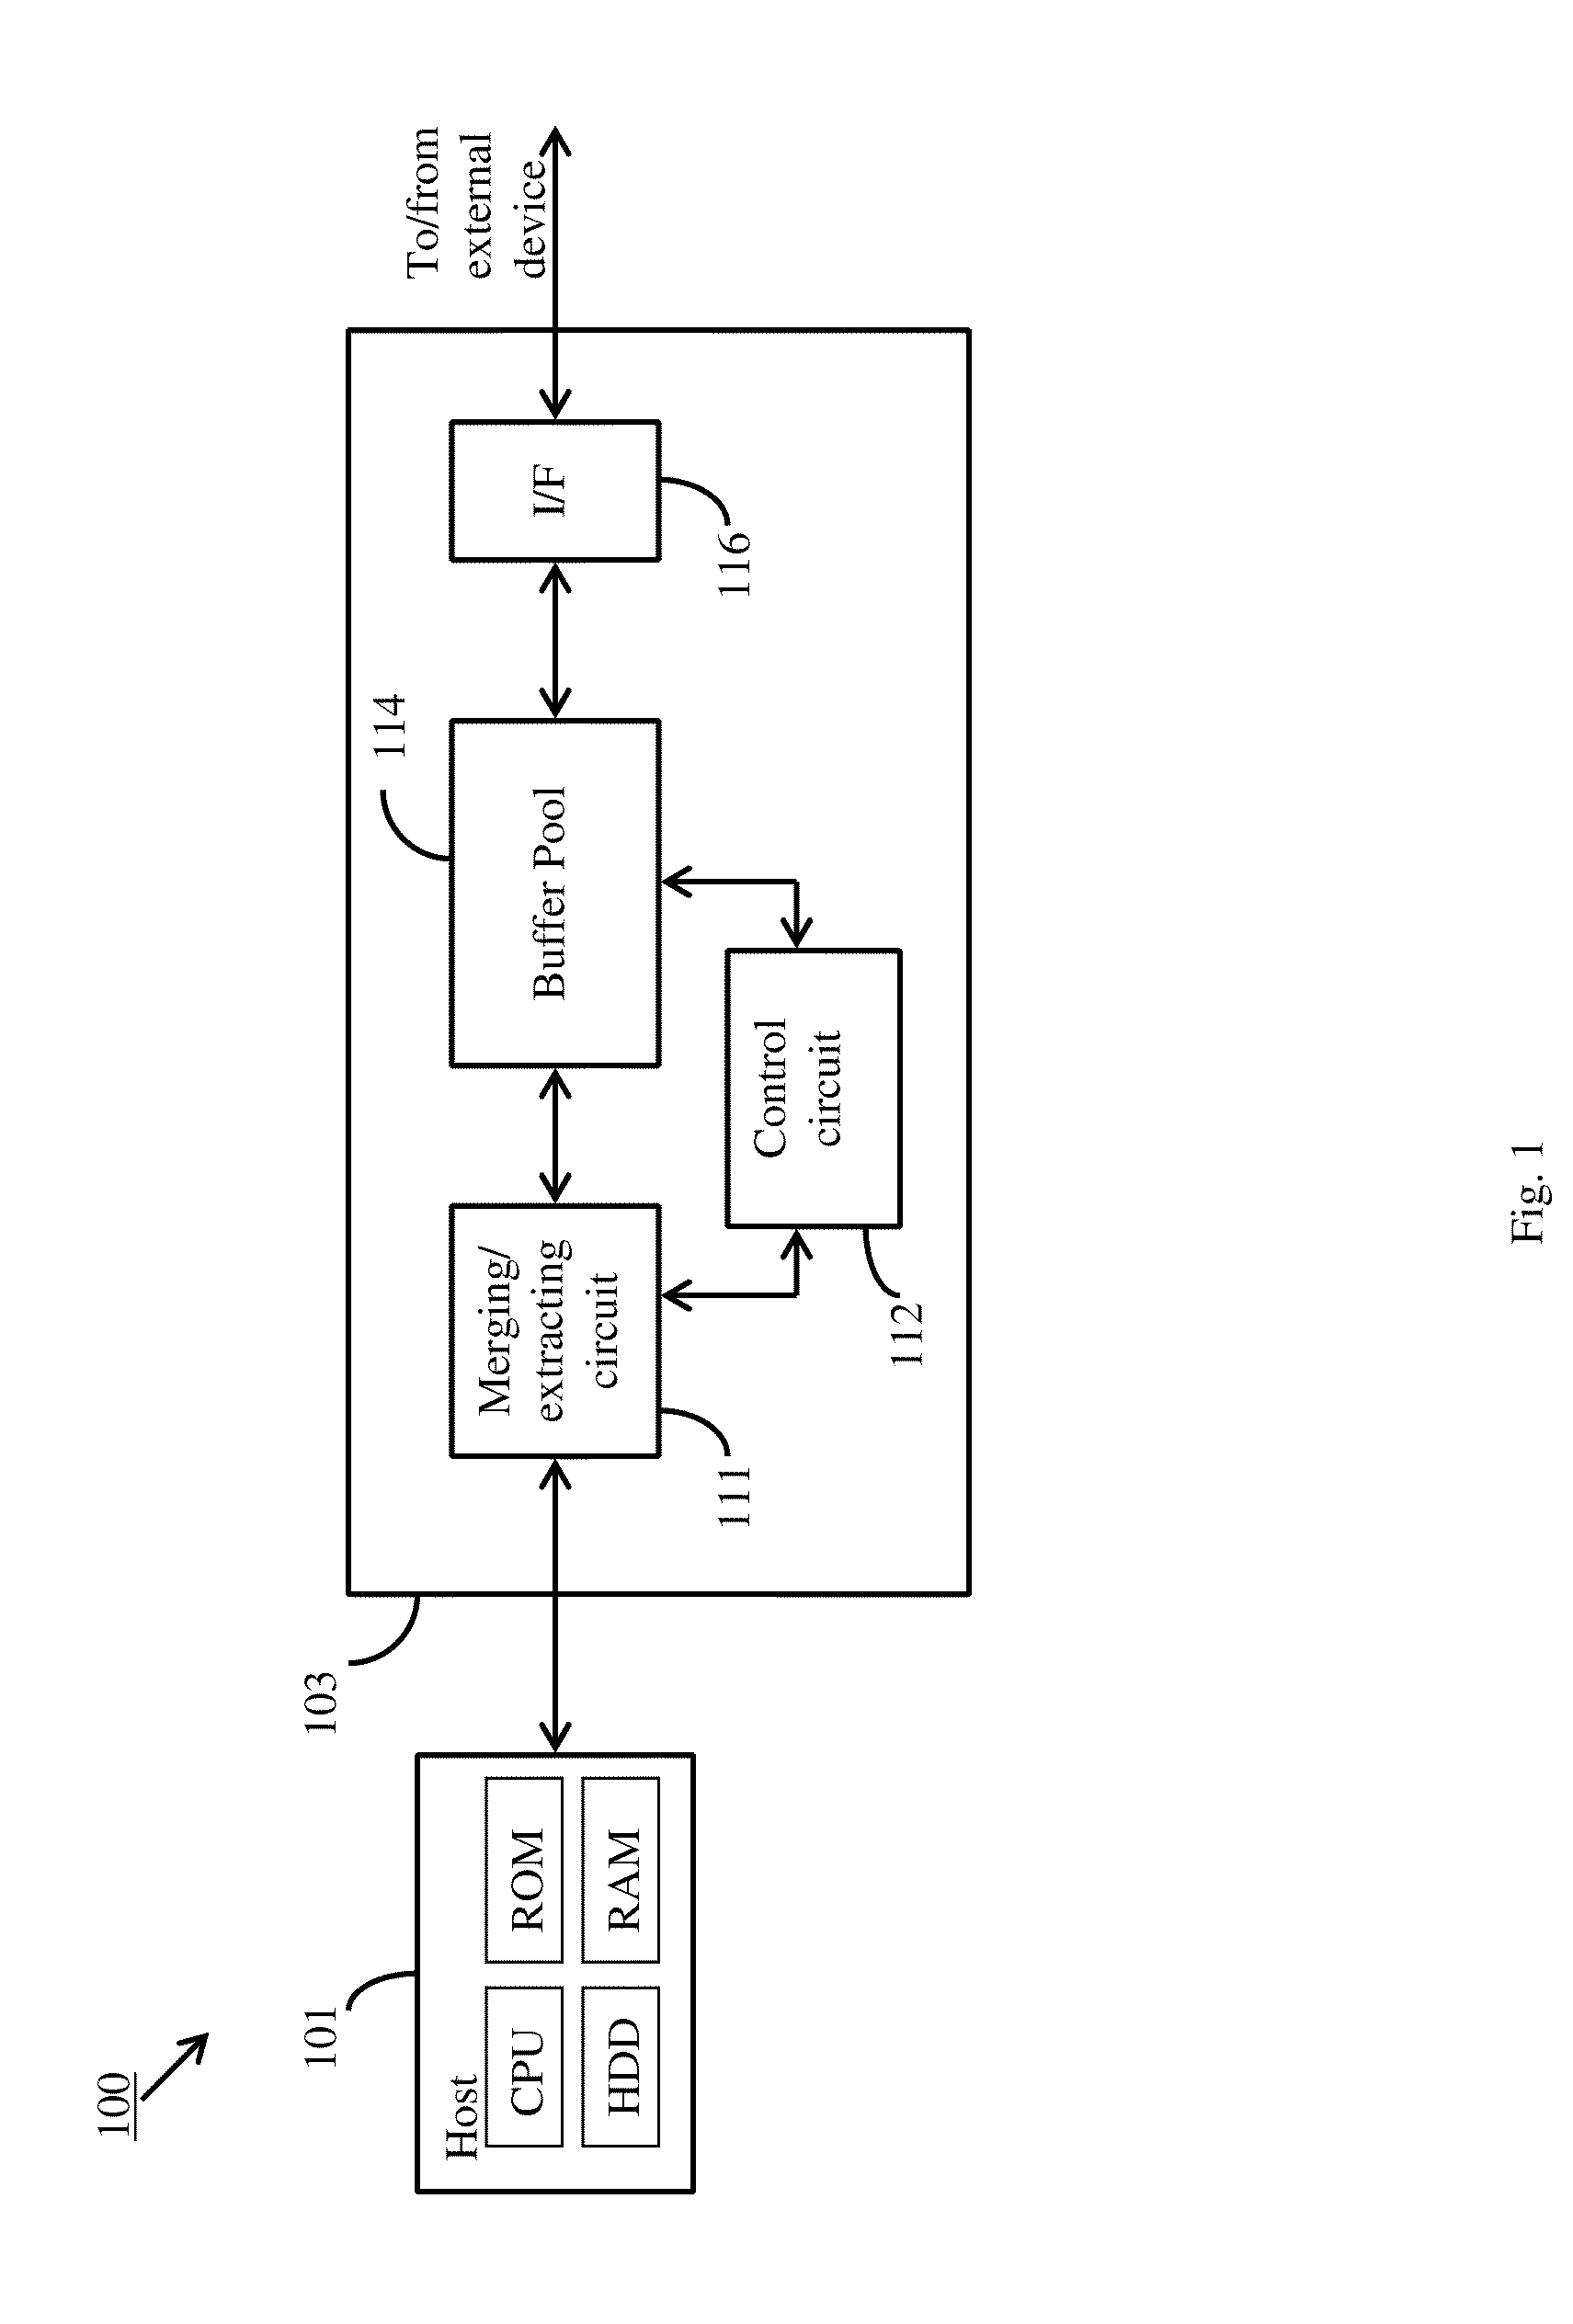 Packet based data transfer system and method for host-slave interface